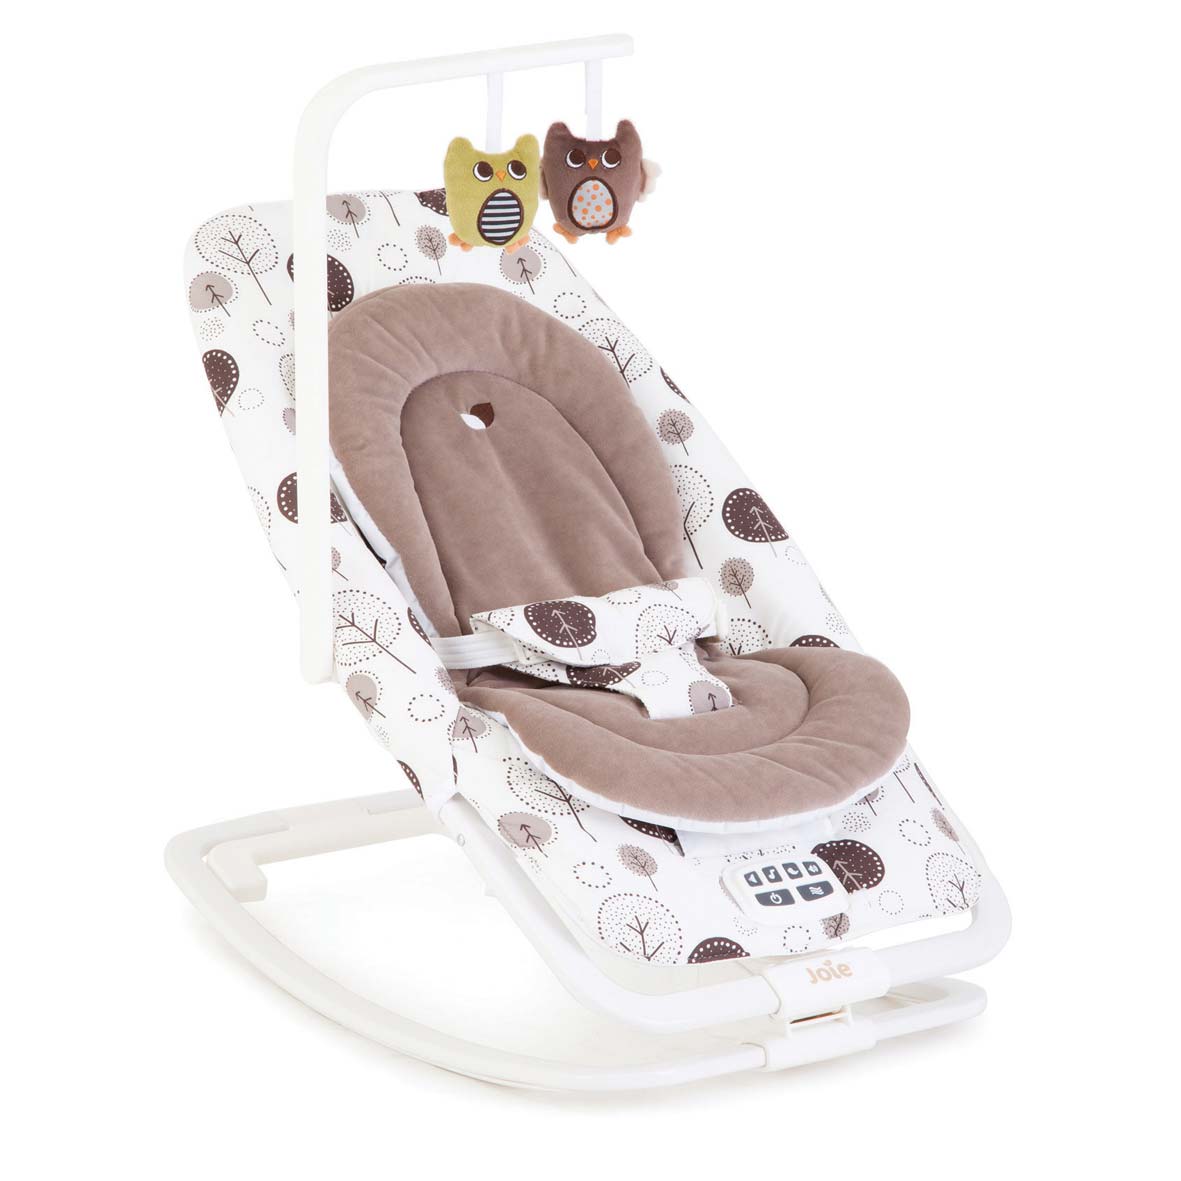 joie dreamer bouncer review